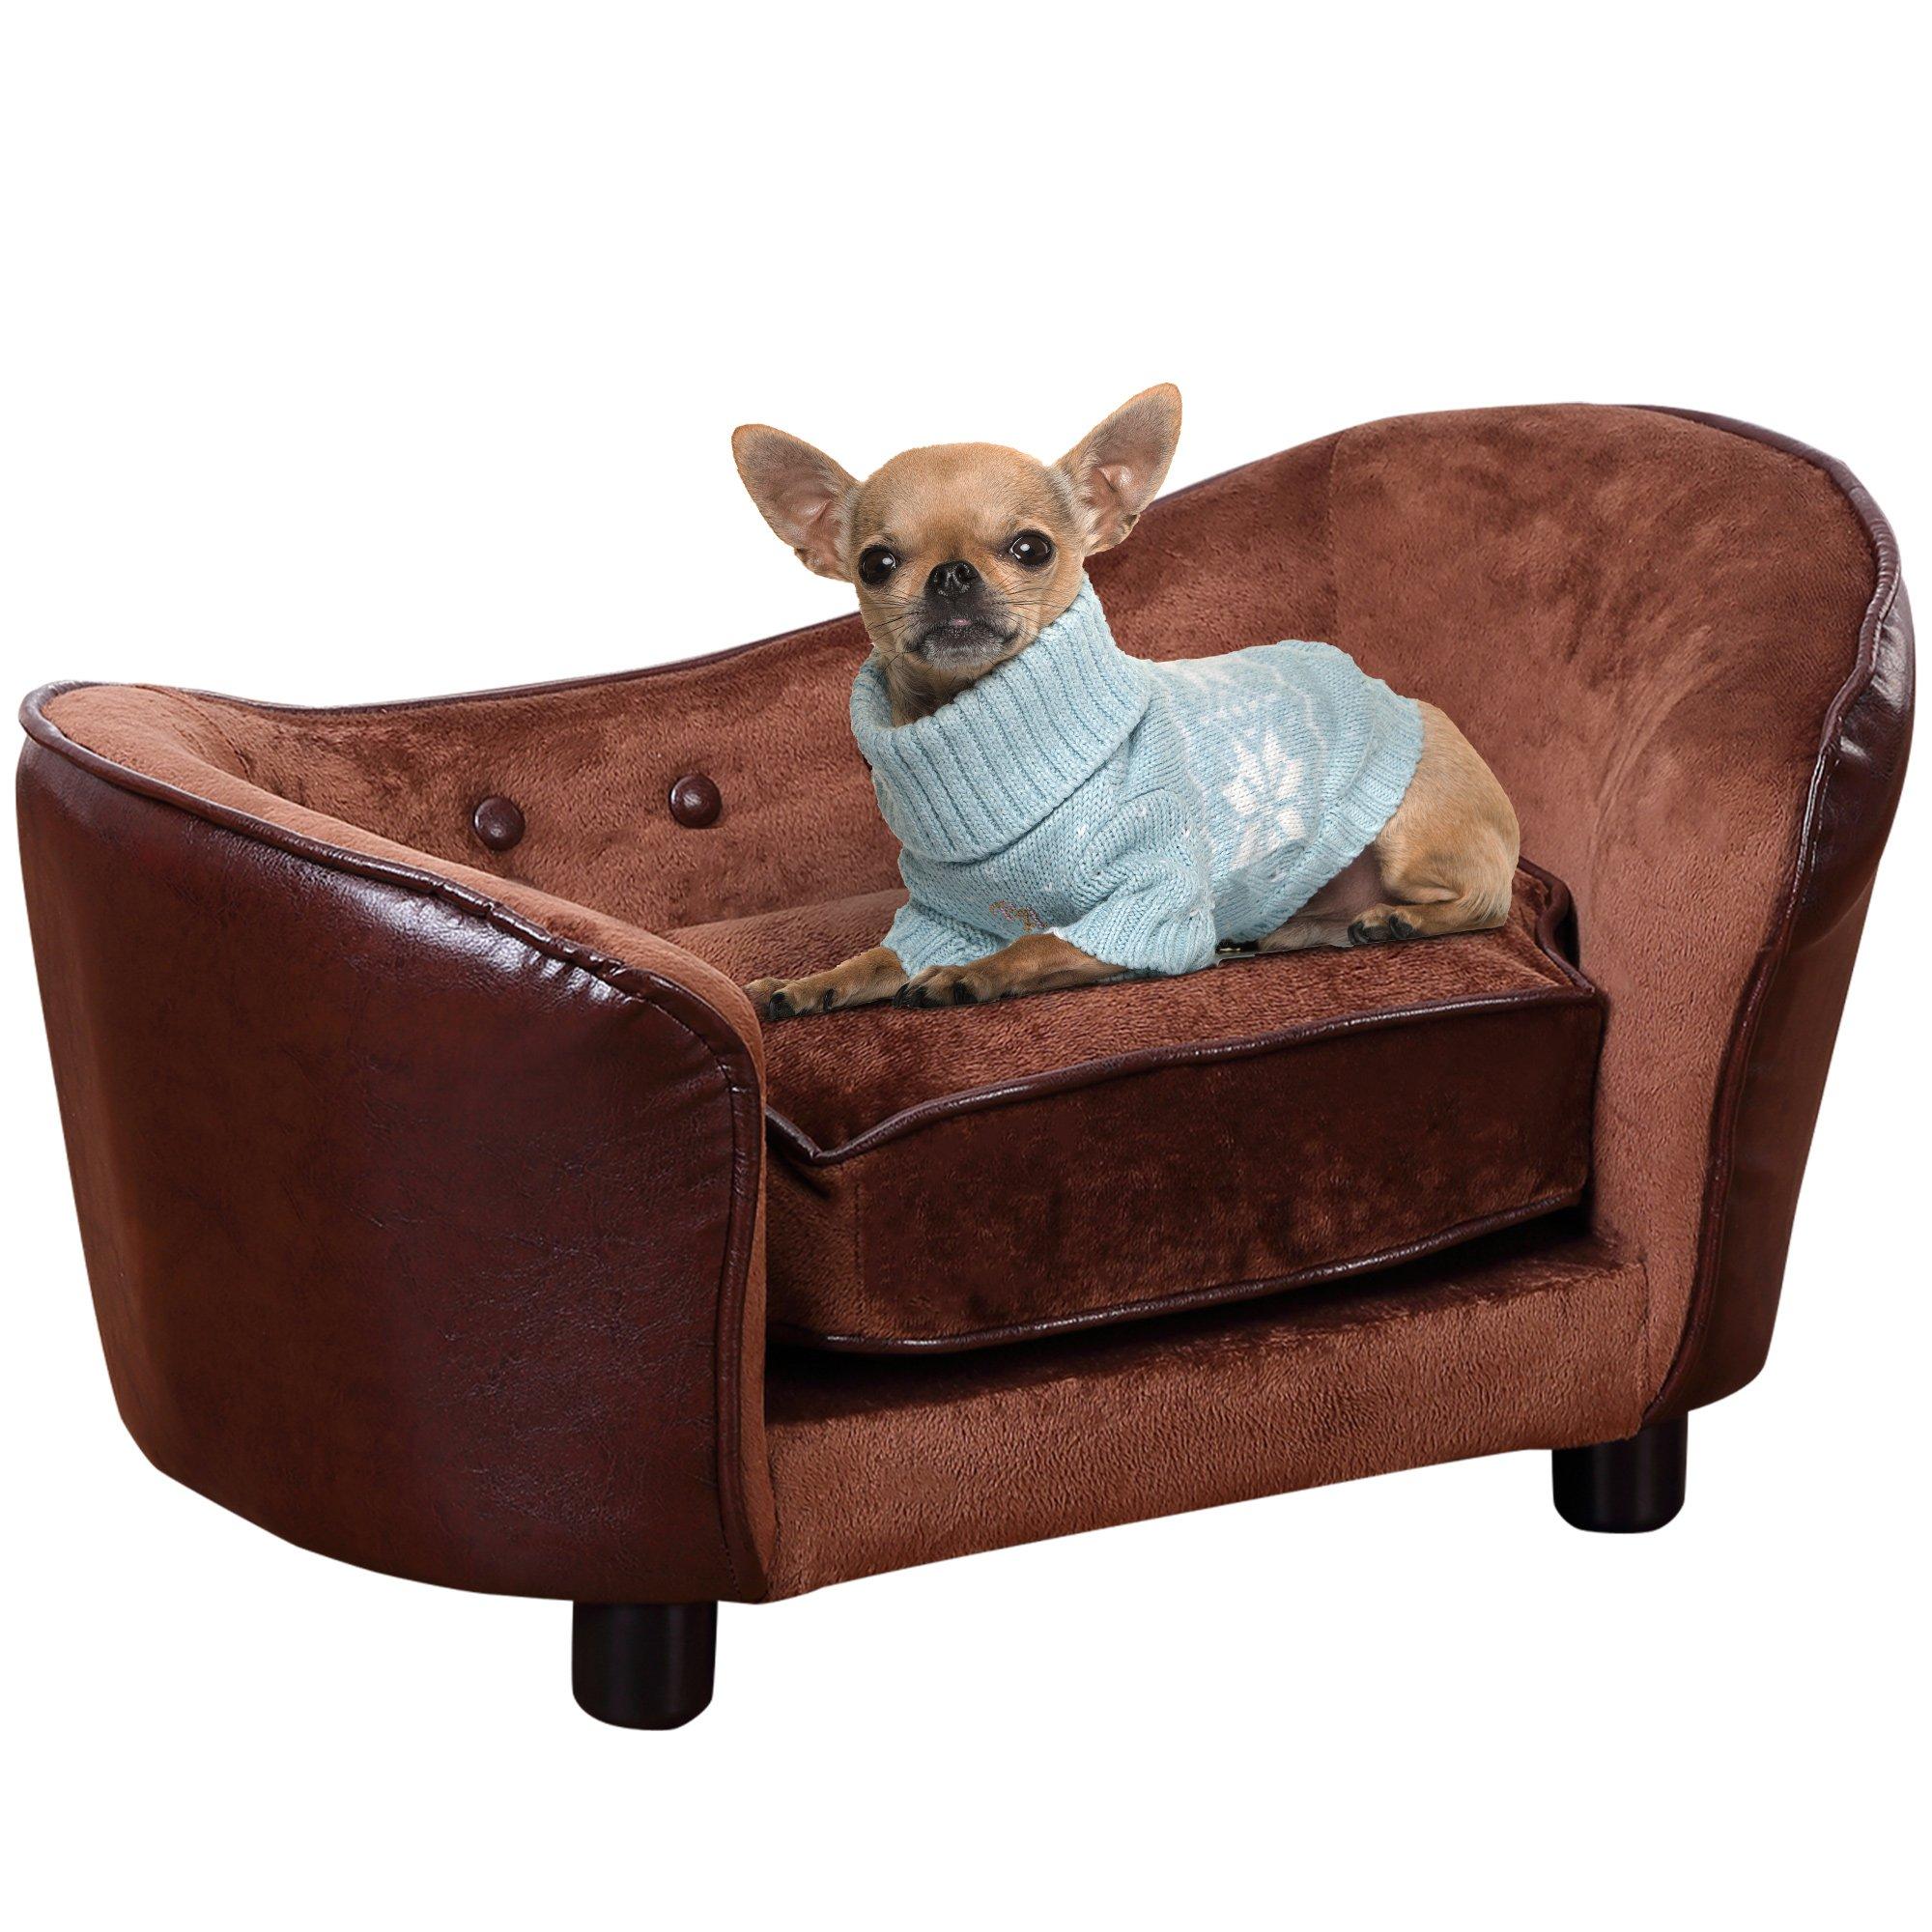 Pet Sofa Chair for XS Dogs Cats, Dog Couch Bed W/ Legs Soft Cushion, Brown